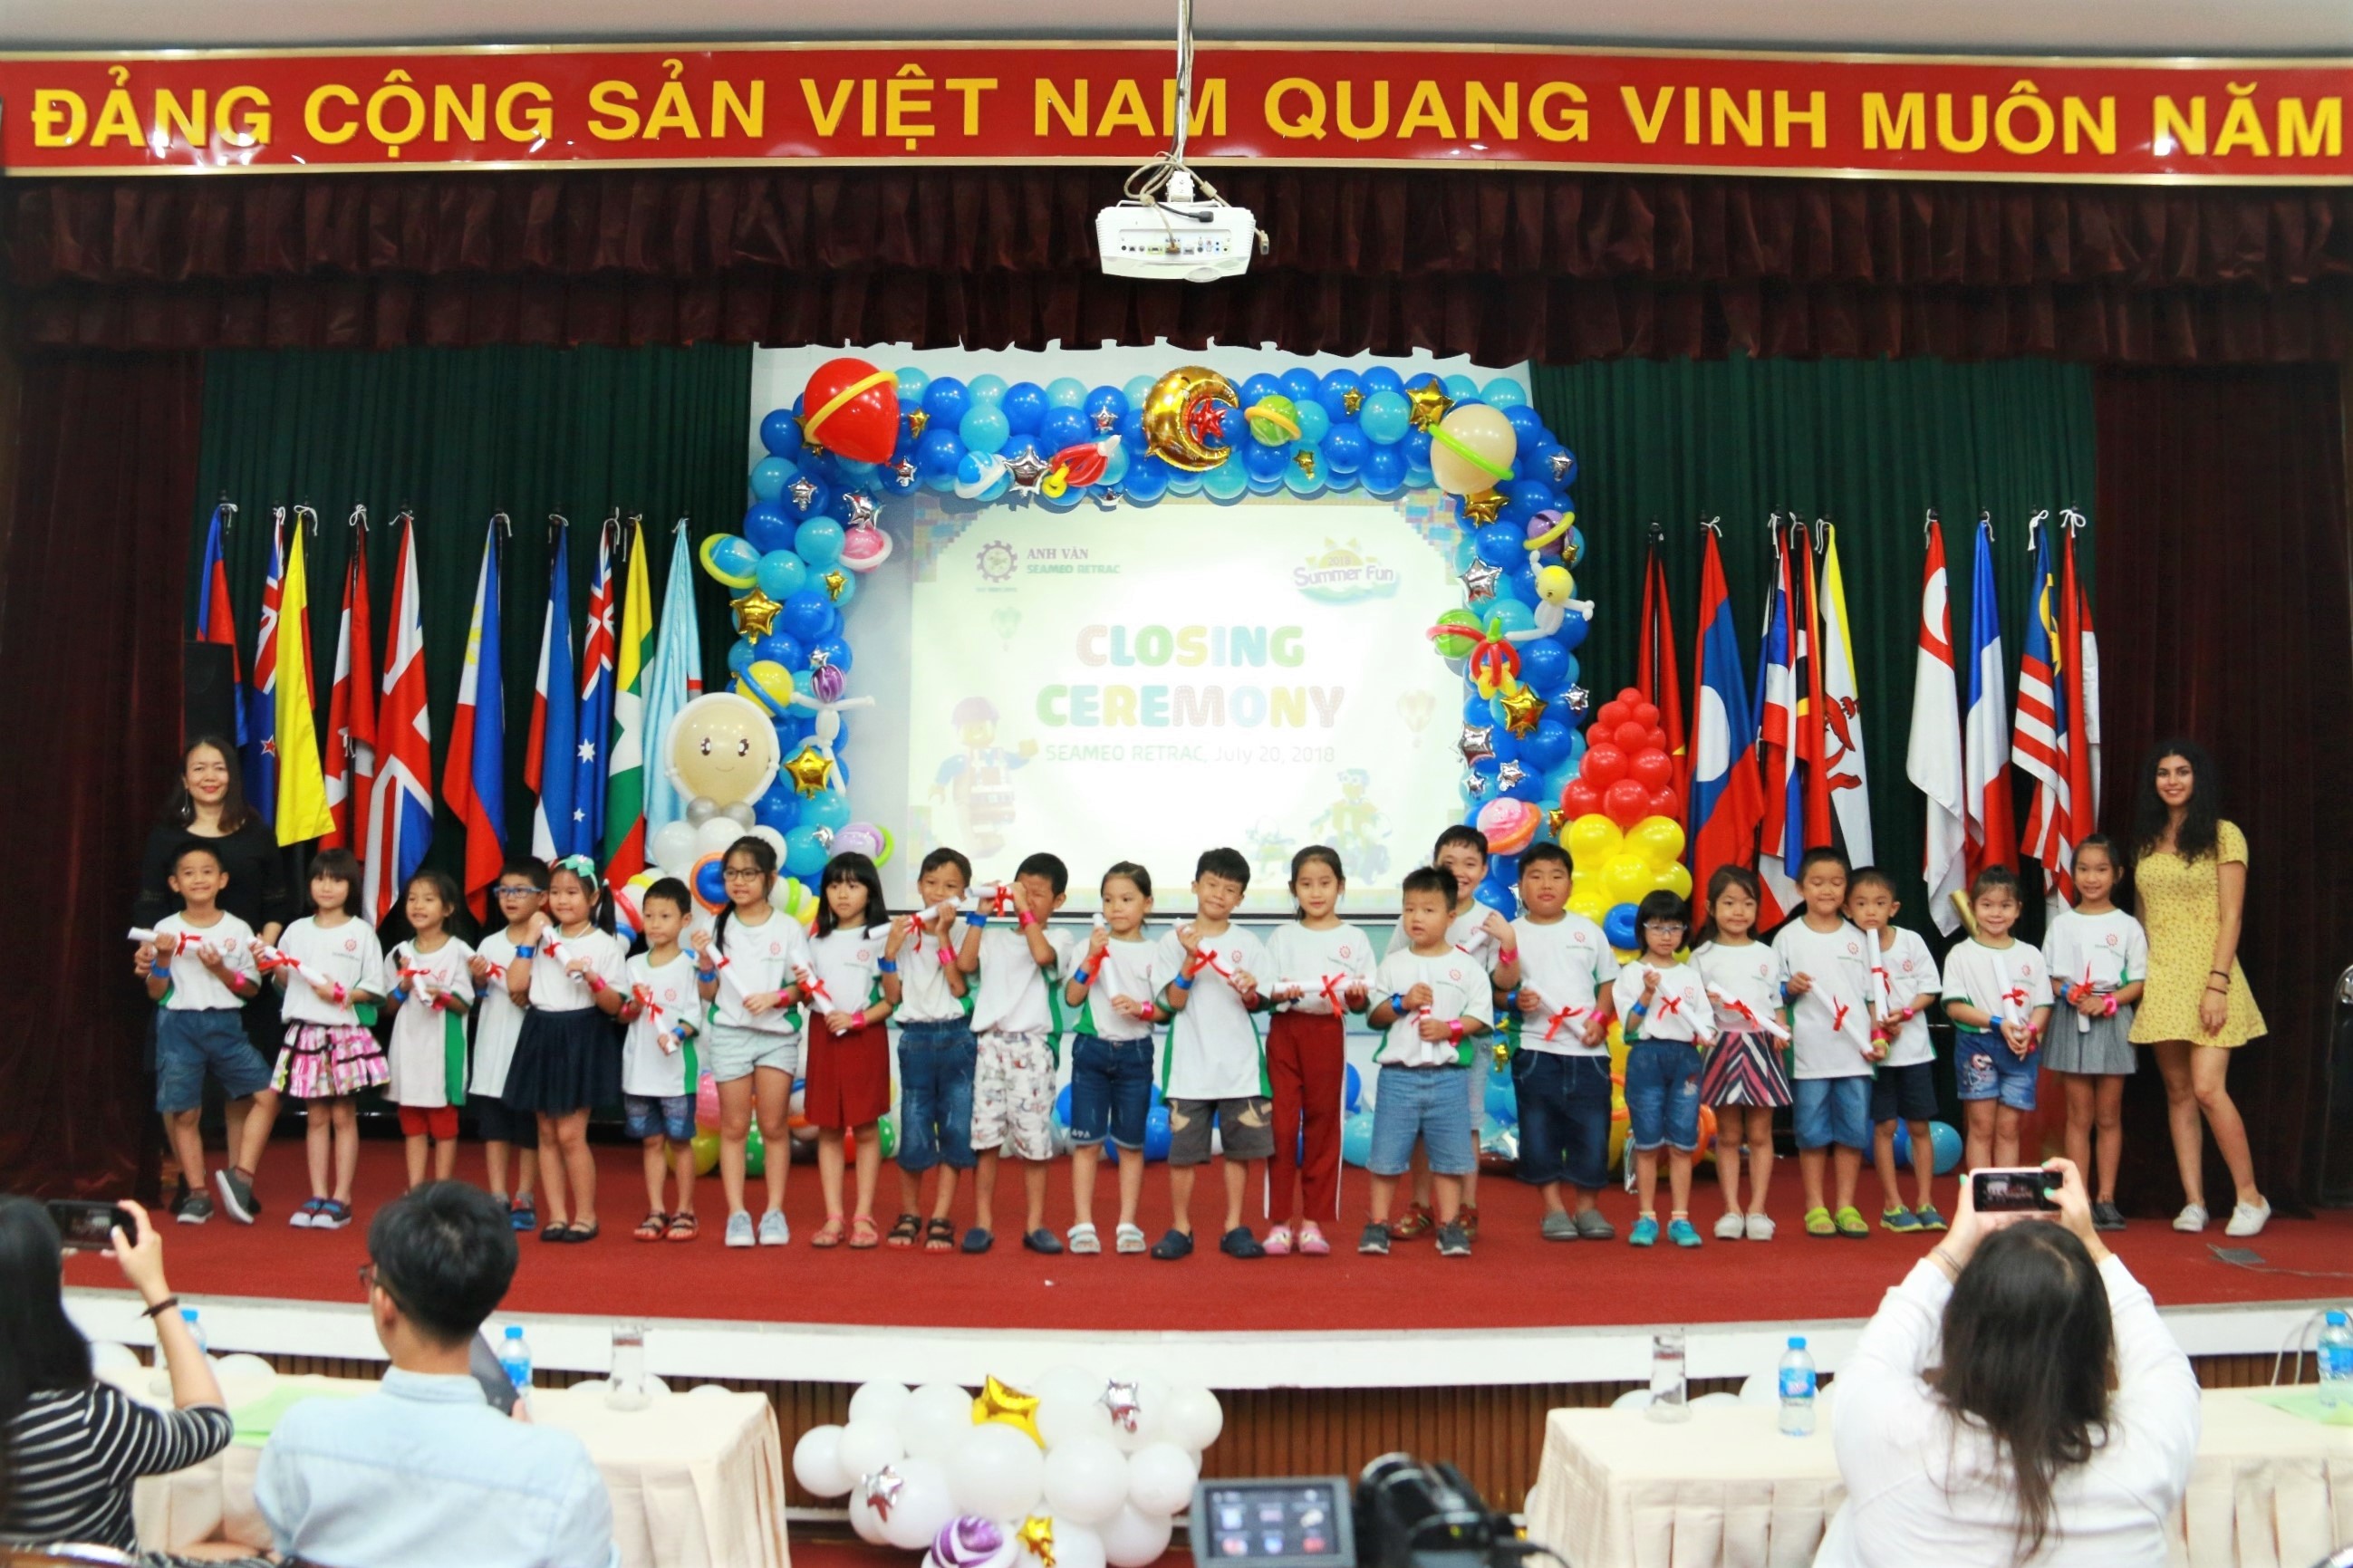 The Closing Ceremony of SUMMER FUN 2018